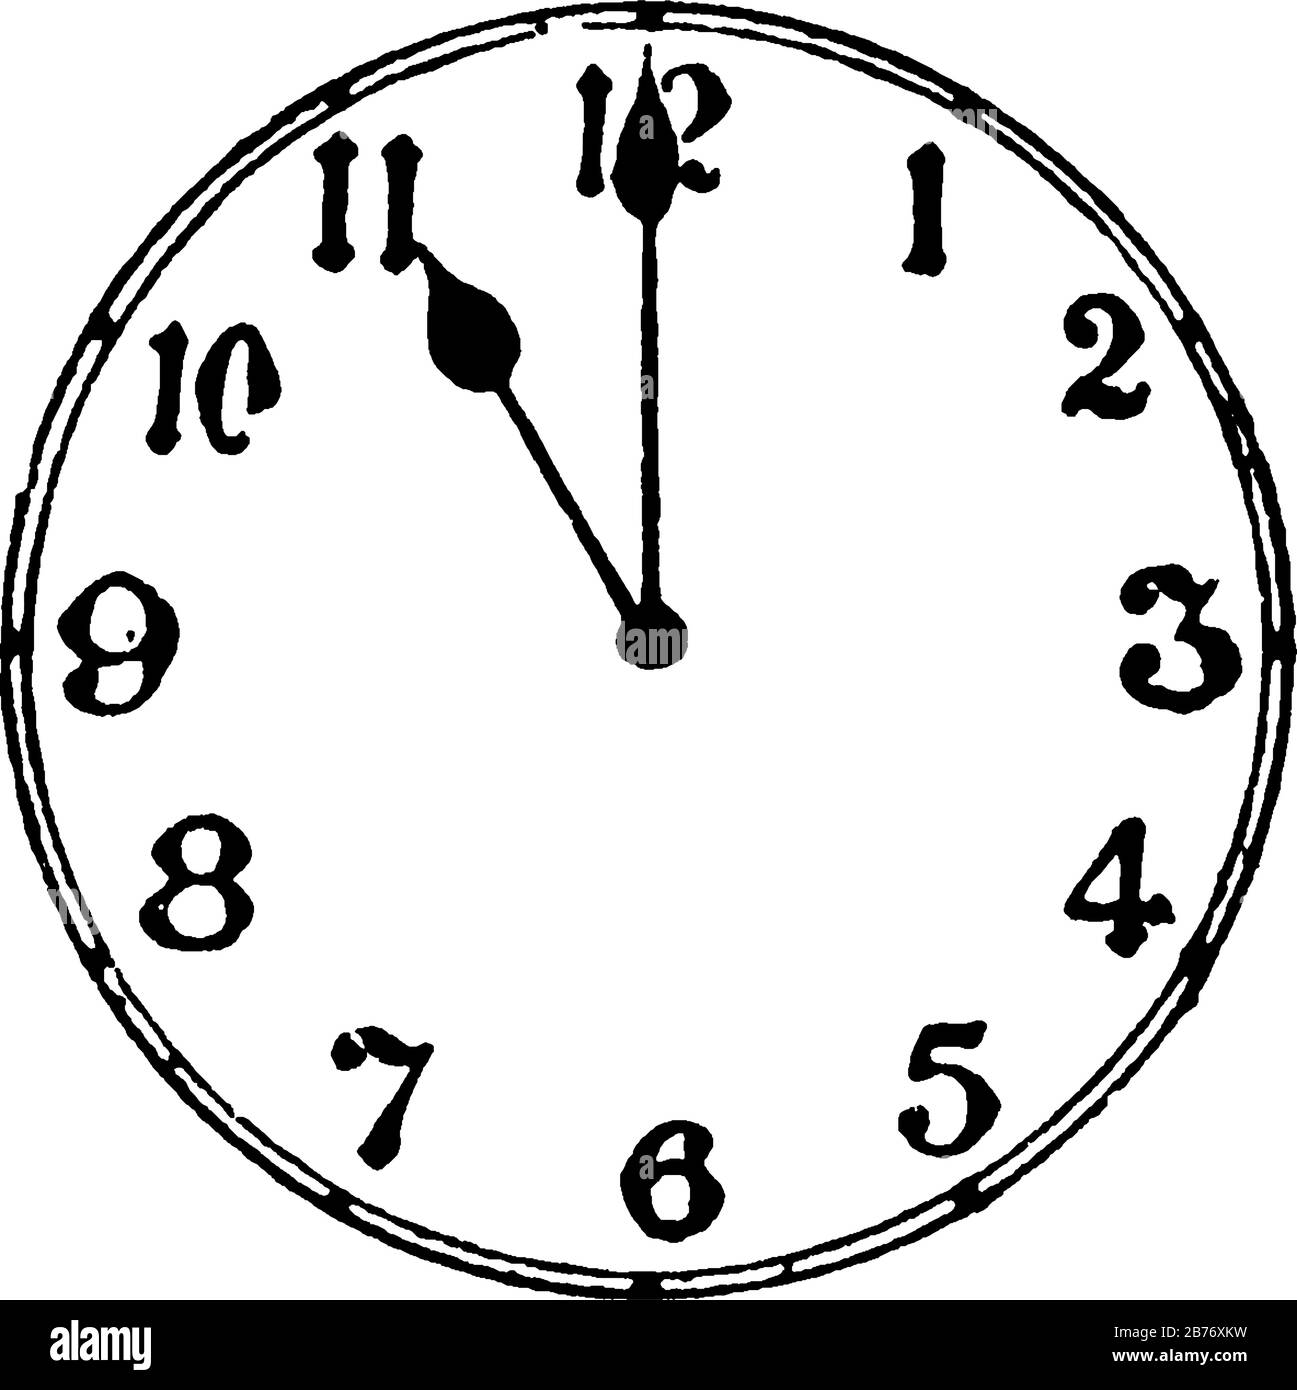 A typical representation of a round-shaped wall clock that displays it is 11 o'clock, vintage line drawing or engraving illustration. Stock Vector